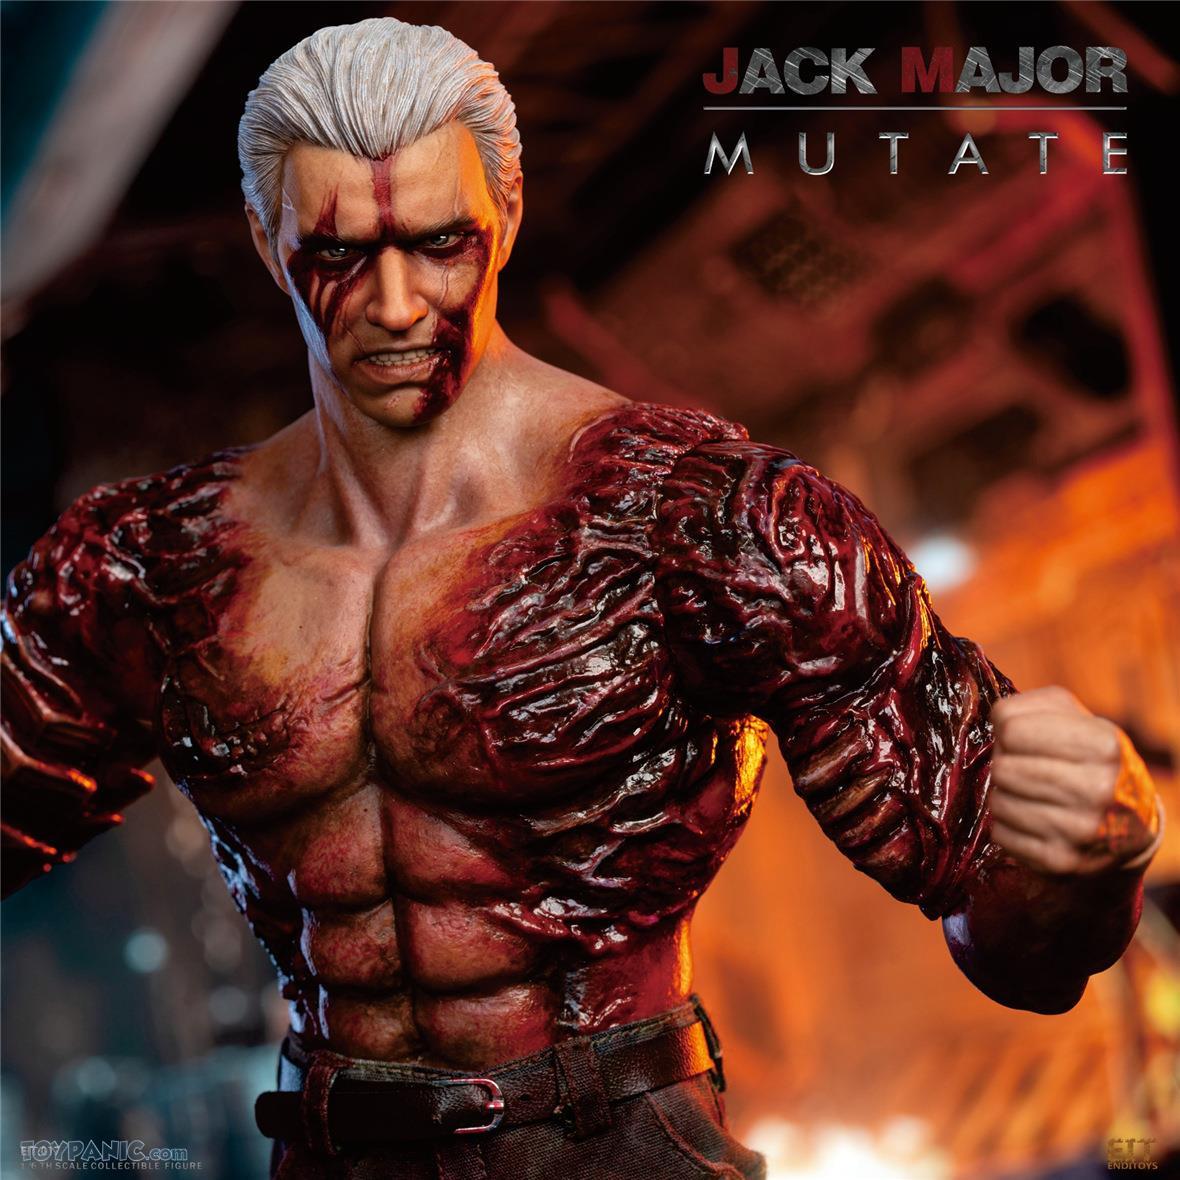 jackmajor - NEW PRODUCT:  1/6 Jack Major Mutate from End I Toys  2732024105954AM_720776